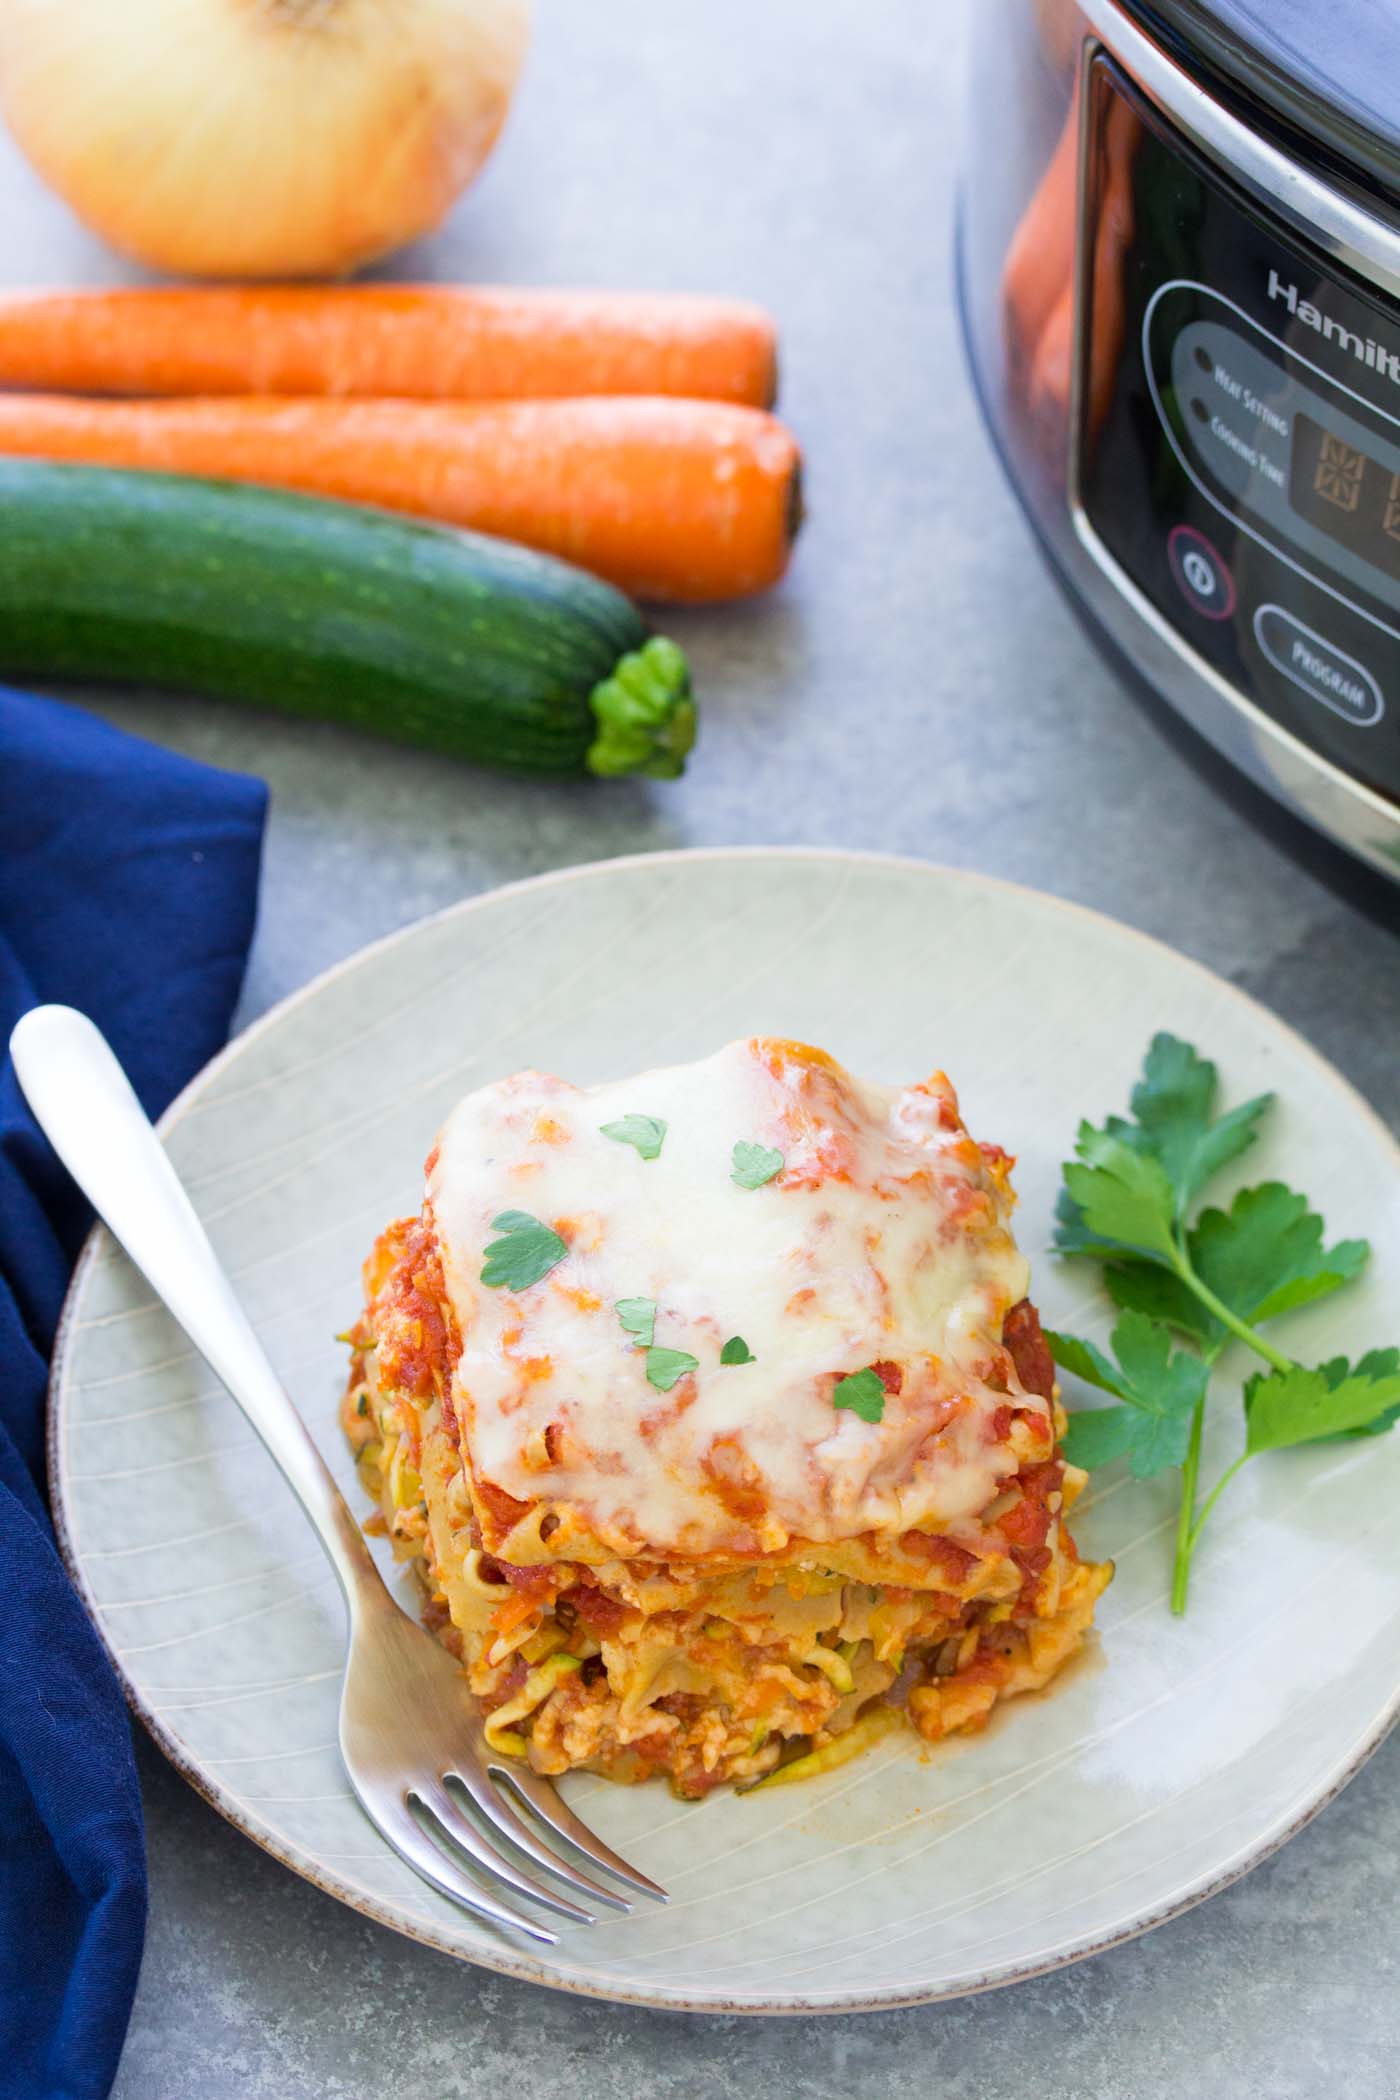 Slice of slow cooker turkey lasagna on a plate with a fork.